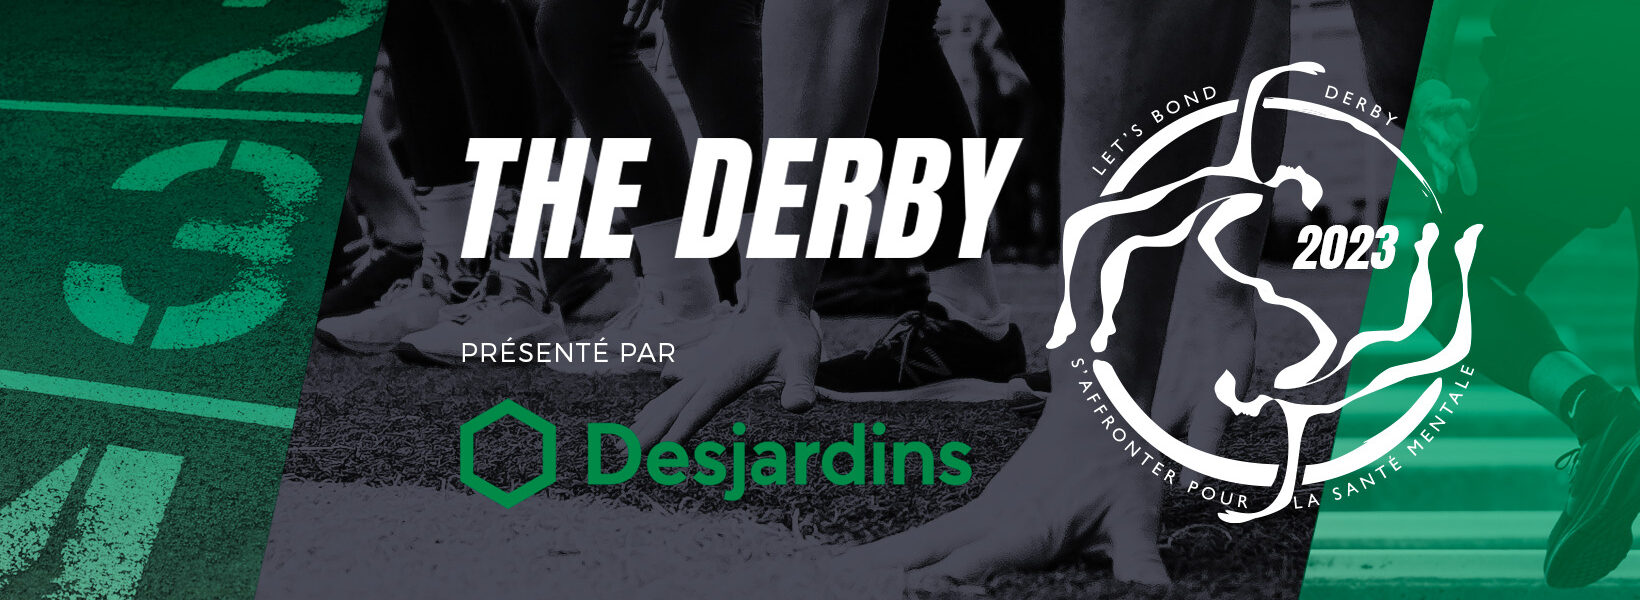 Derby-COVER-FB-2023 (1)